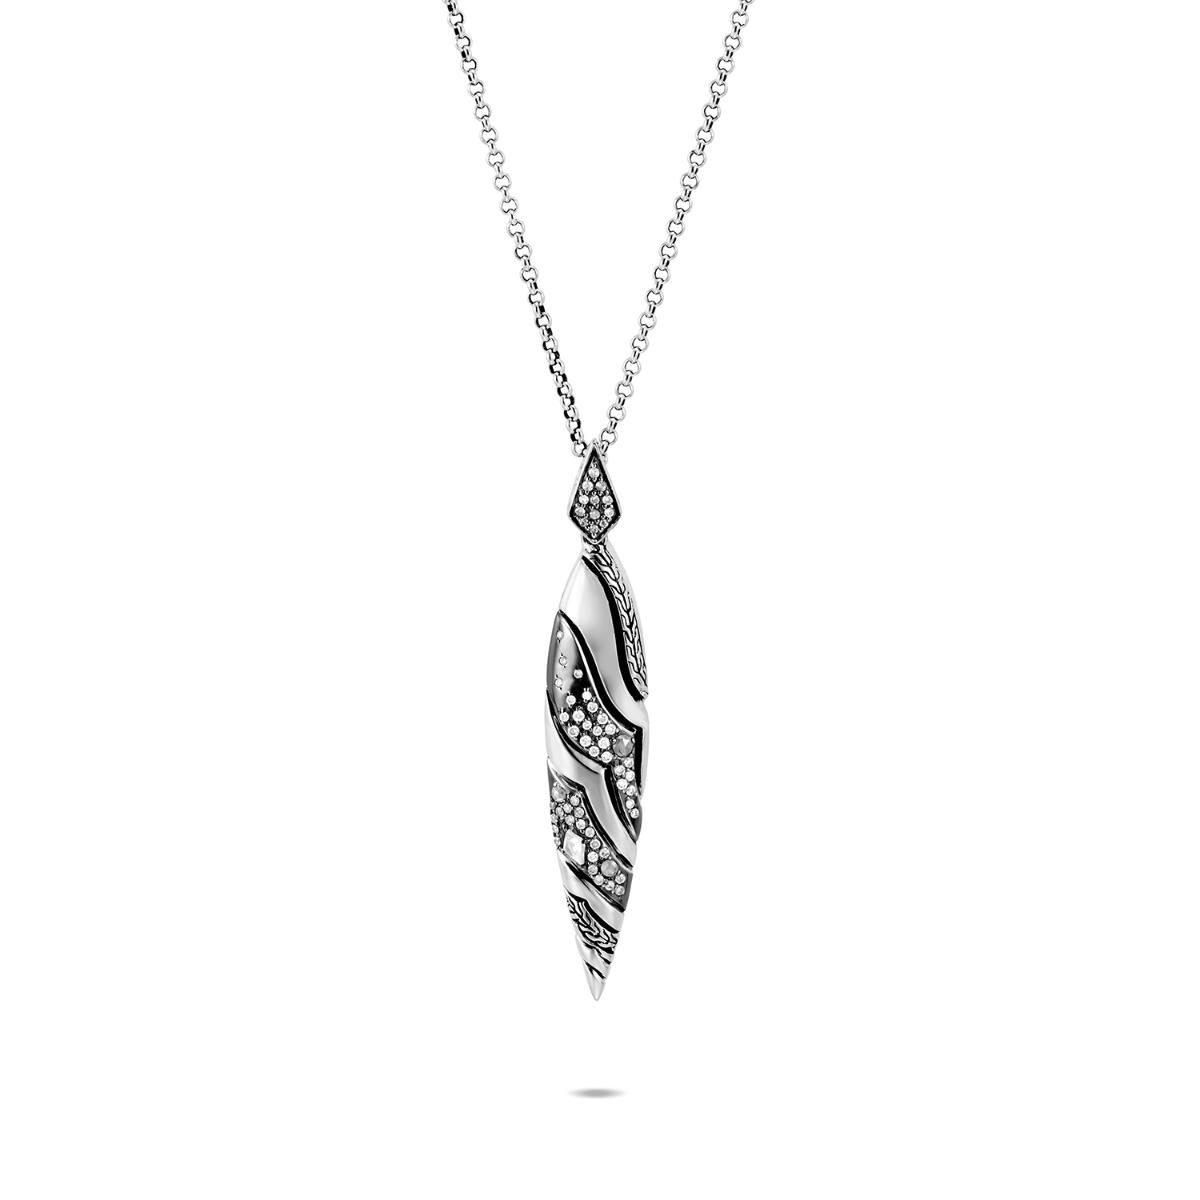 John Hardy Lahar Marquise Pendant Necklace in Silver with Diamonds 0